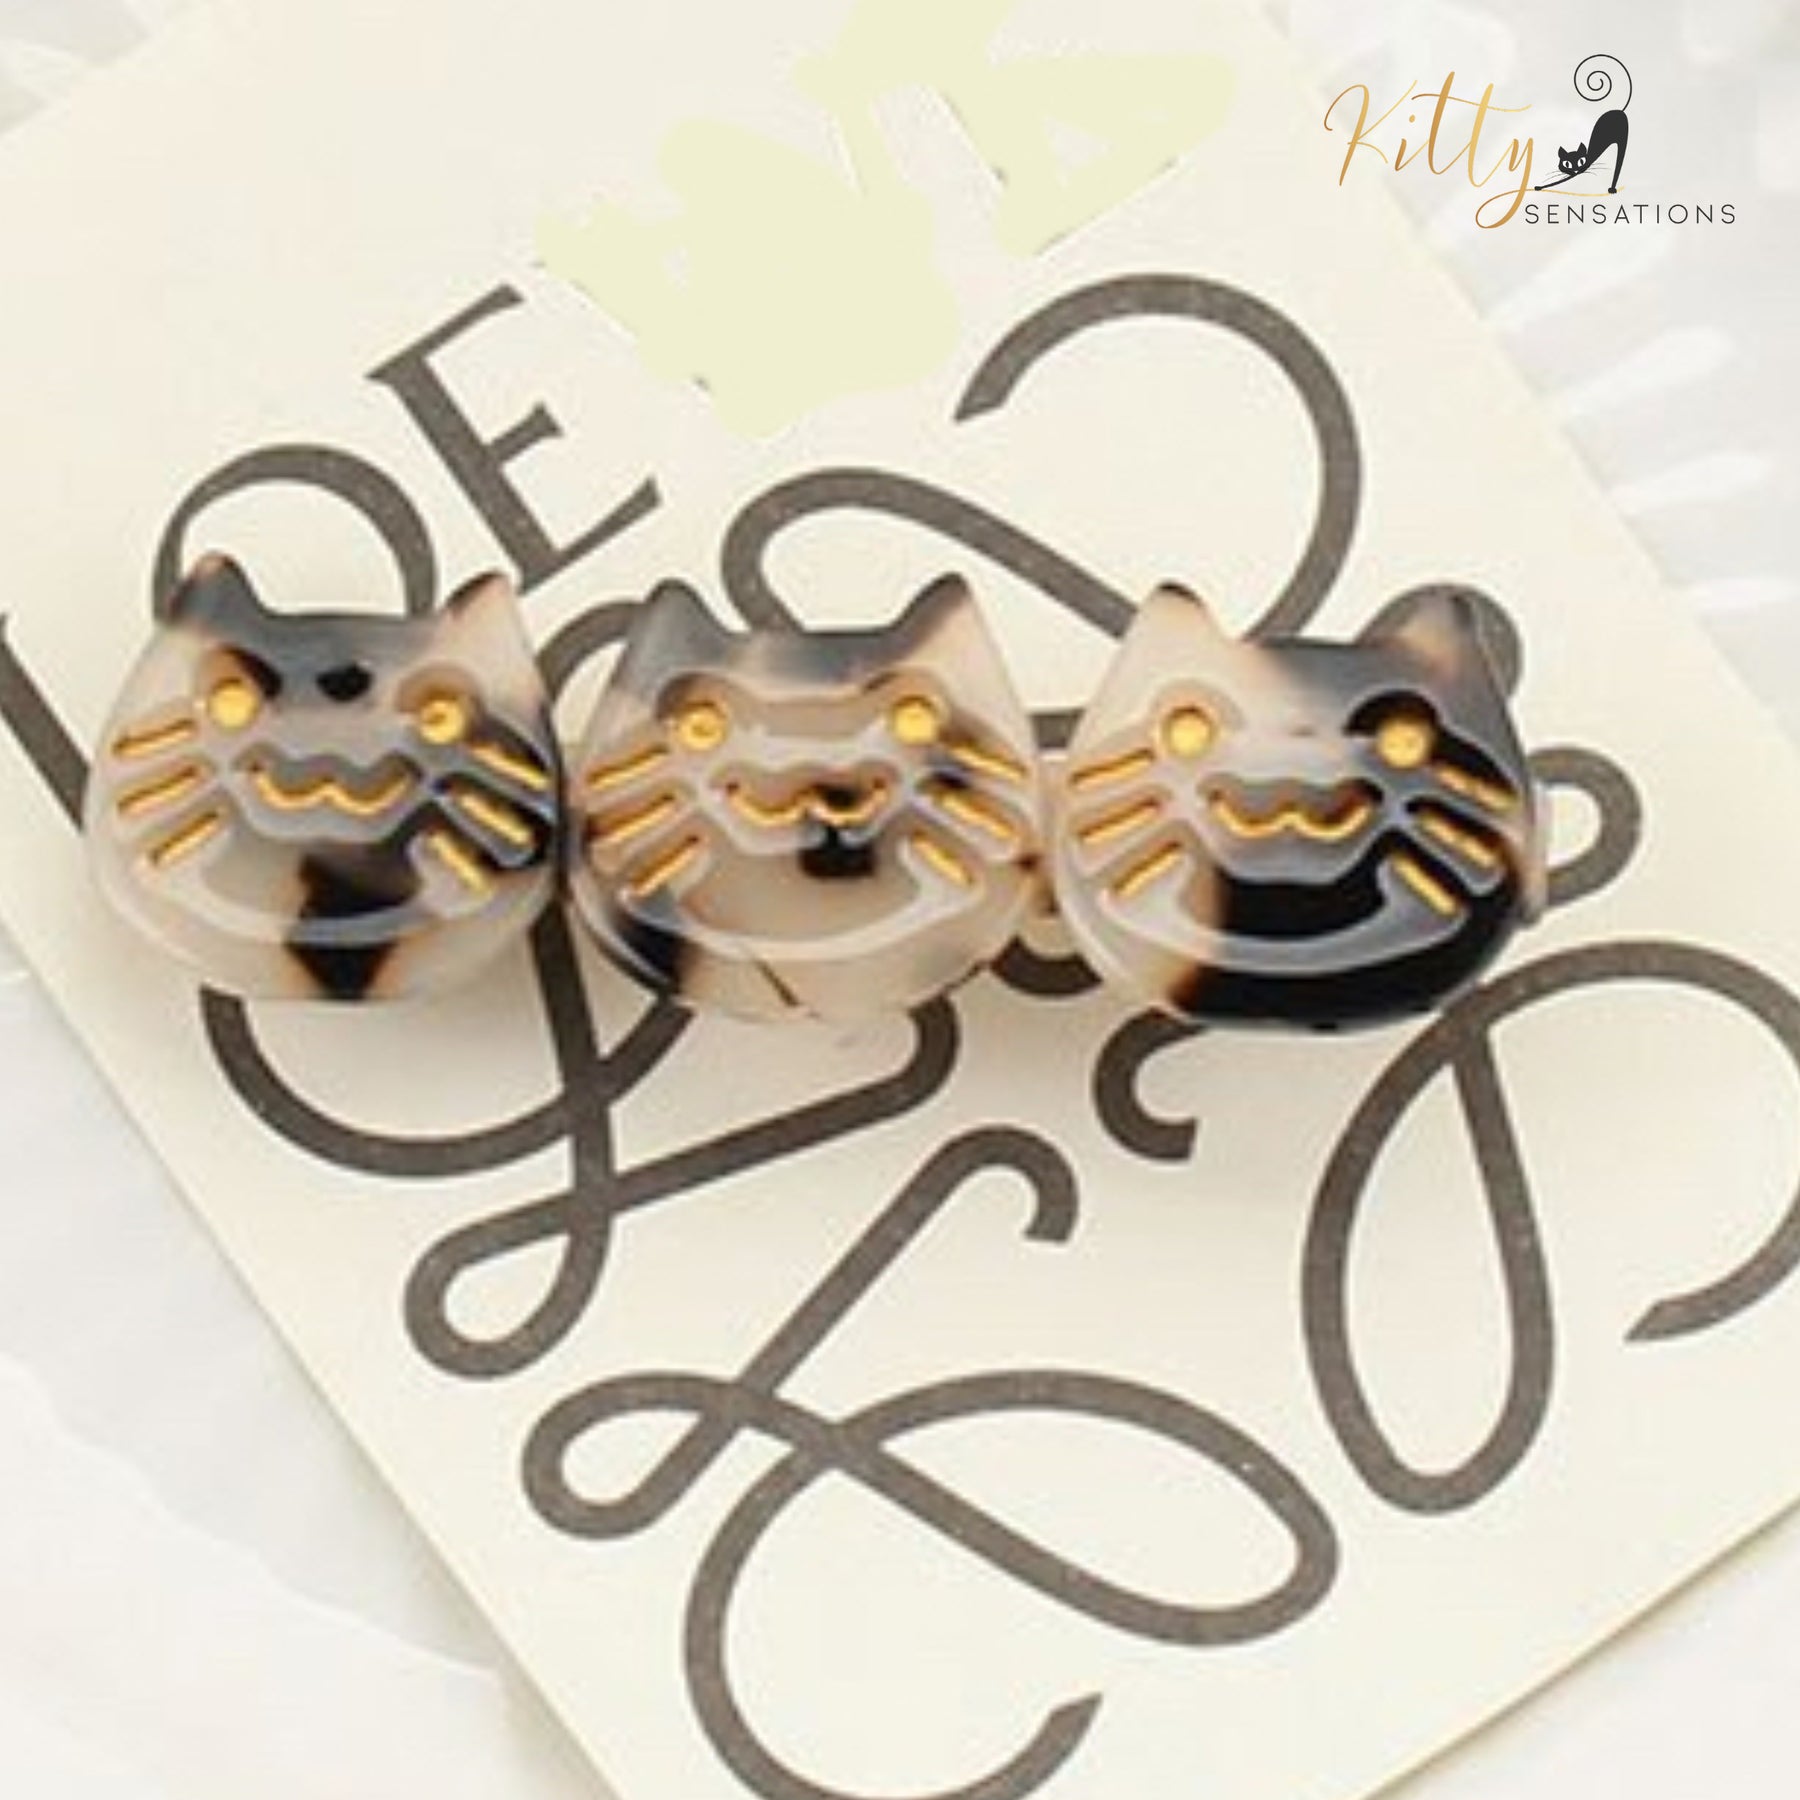 www.KittySensations.com: Three Kitties Hair Clip (High Quality Acetate) - Available in Multiple Color Options ($28.55): https://www.kittysensations.com/products/three-kitties-hair-clip-high-quality-acetate-available-in-multiple-colors